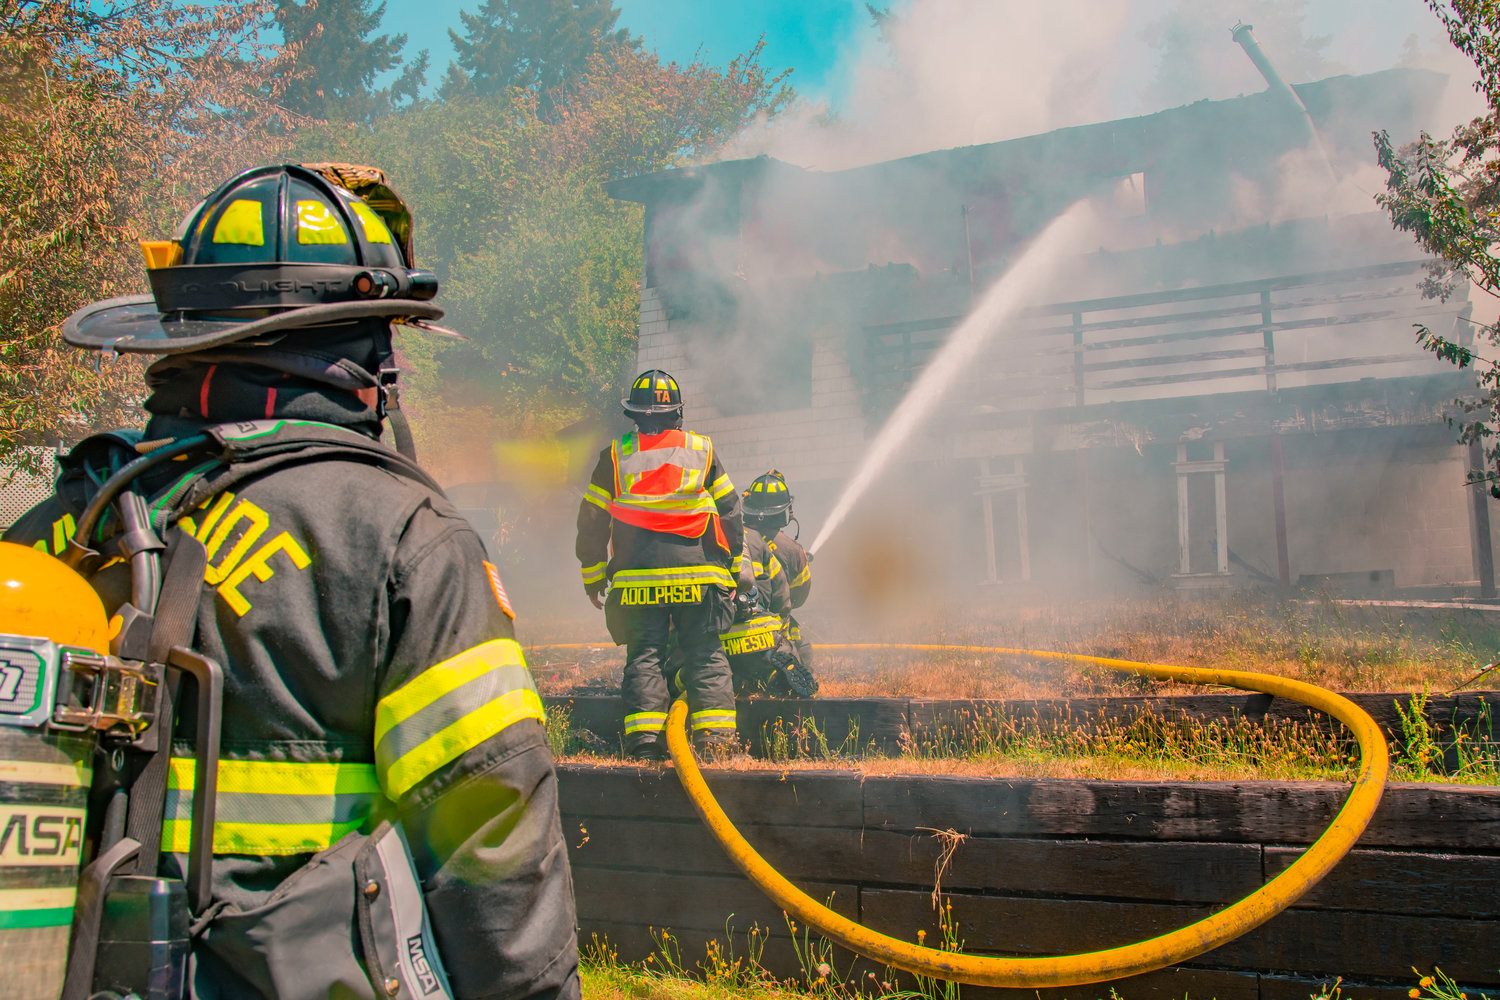 Riverside Fire Authority firefighters use a hose to put out flames at a residential structure on East Third Street in Centralia on Thursday.